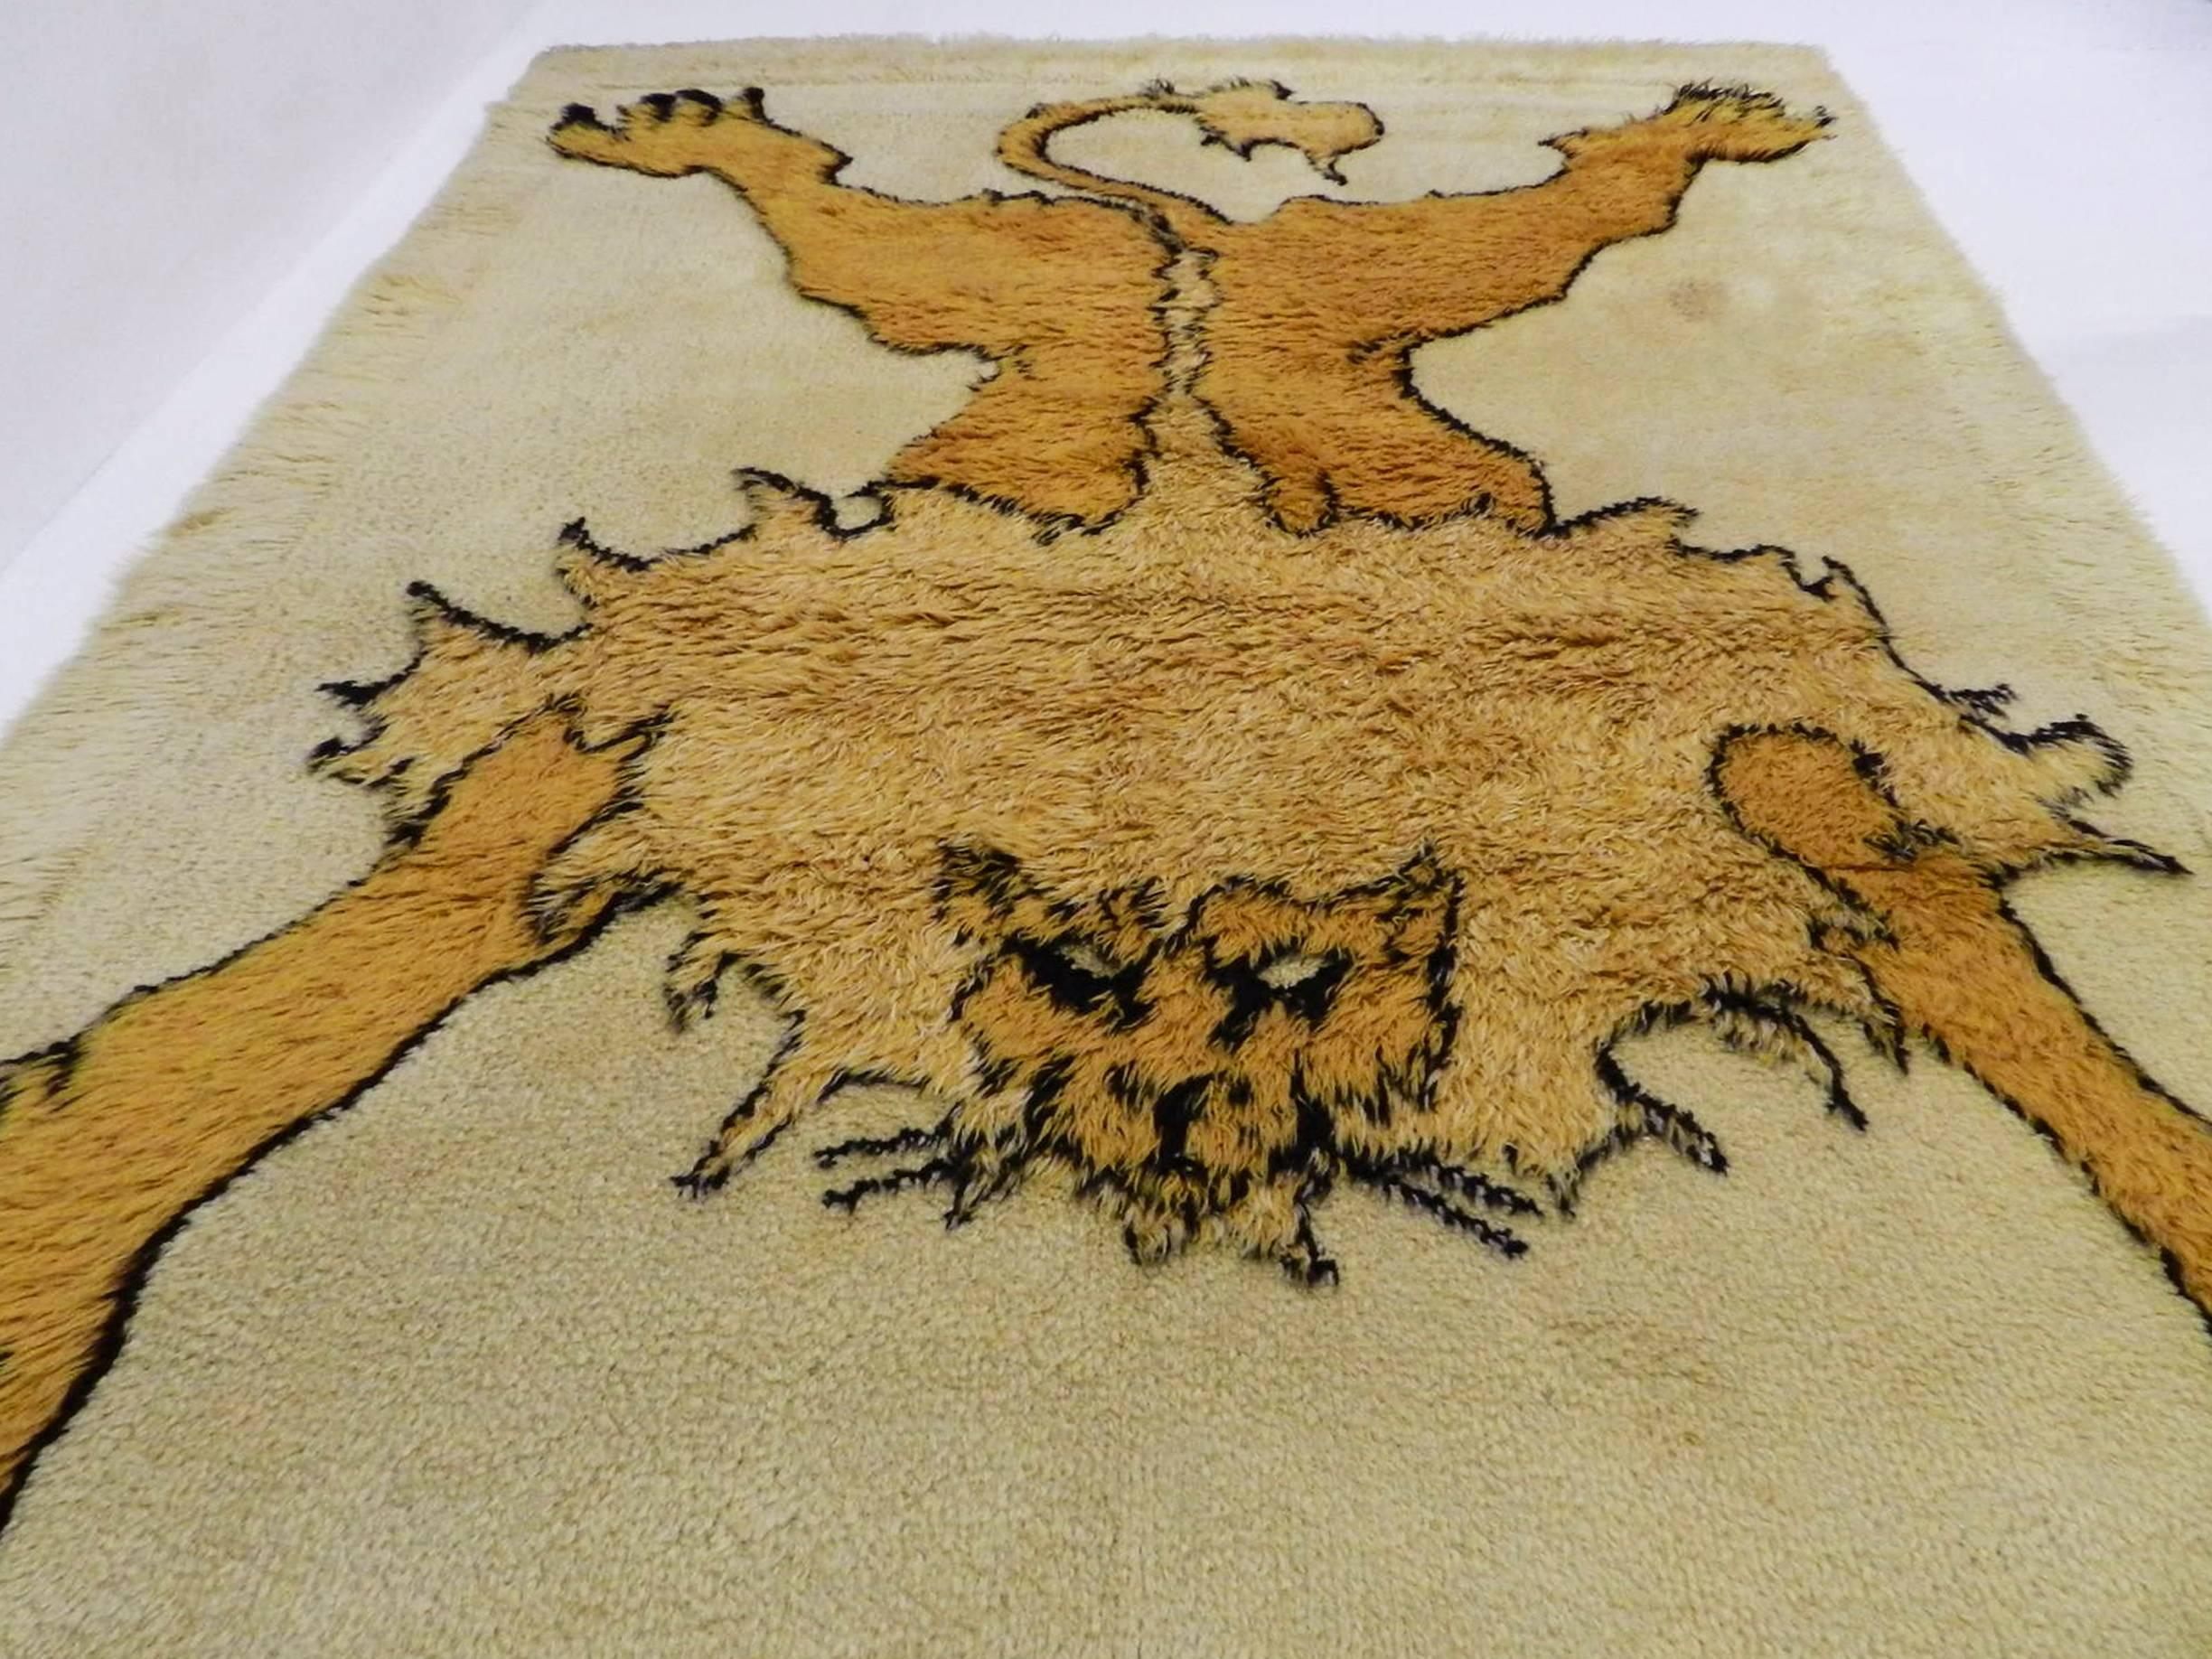 Mid-Century Modern Tapileo from the Serie Tapizoo, Rare Art Rug in Limited Edition  1970 Italy